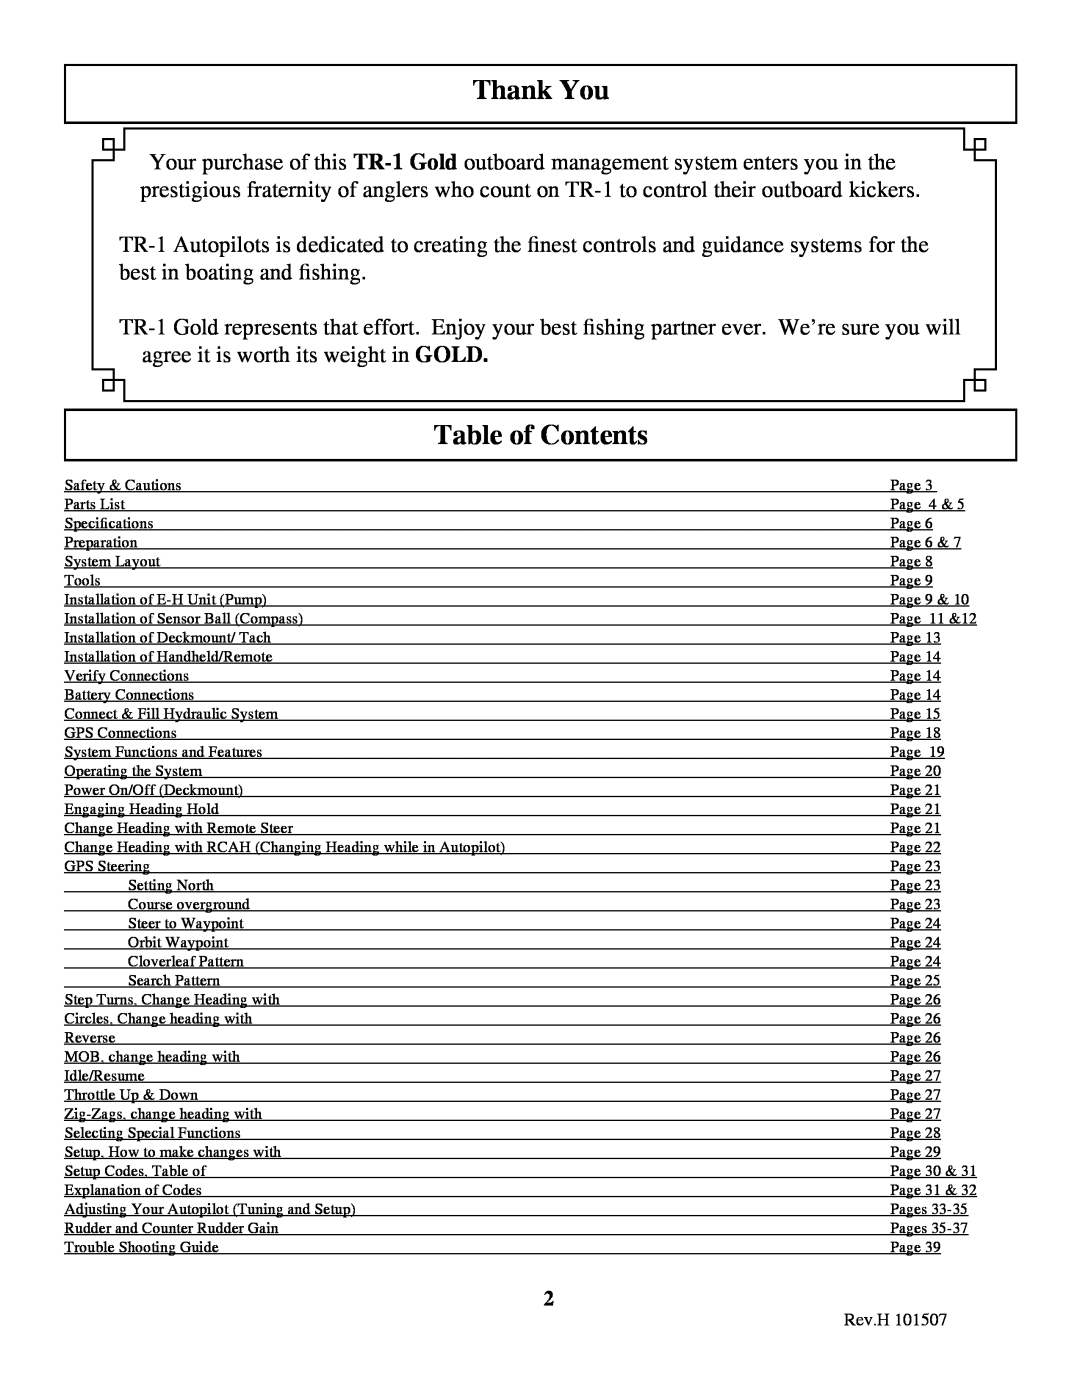 Garmin 906-2000-00 owner manual Thank You, Table of Contents, Rev.H 